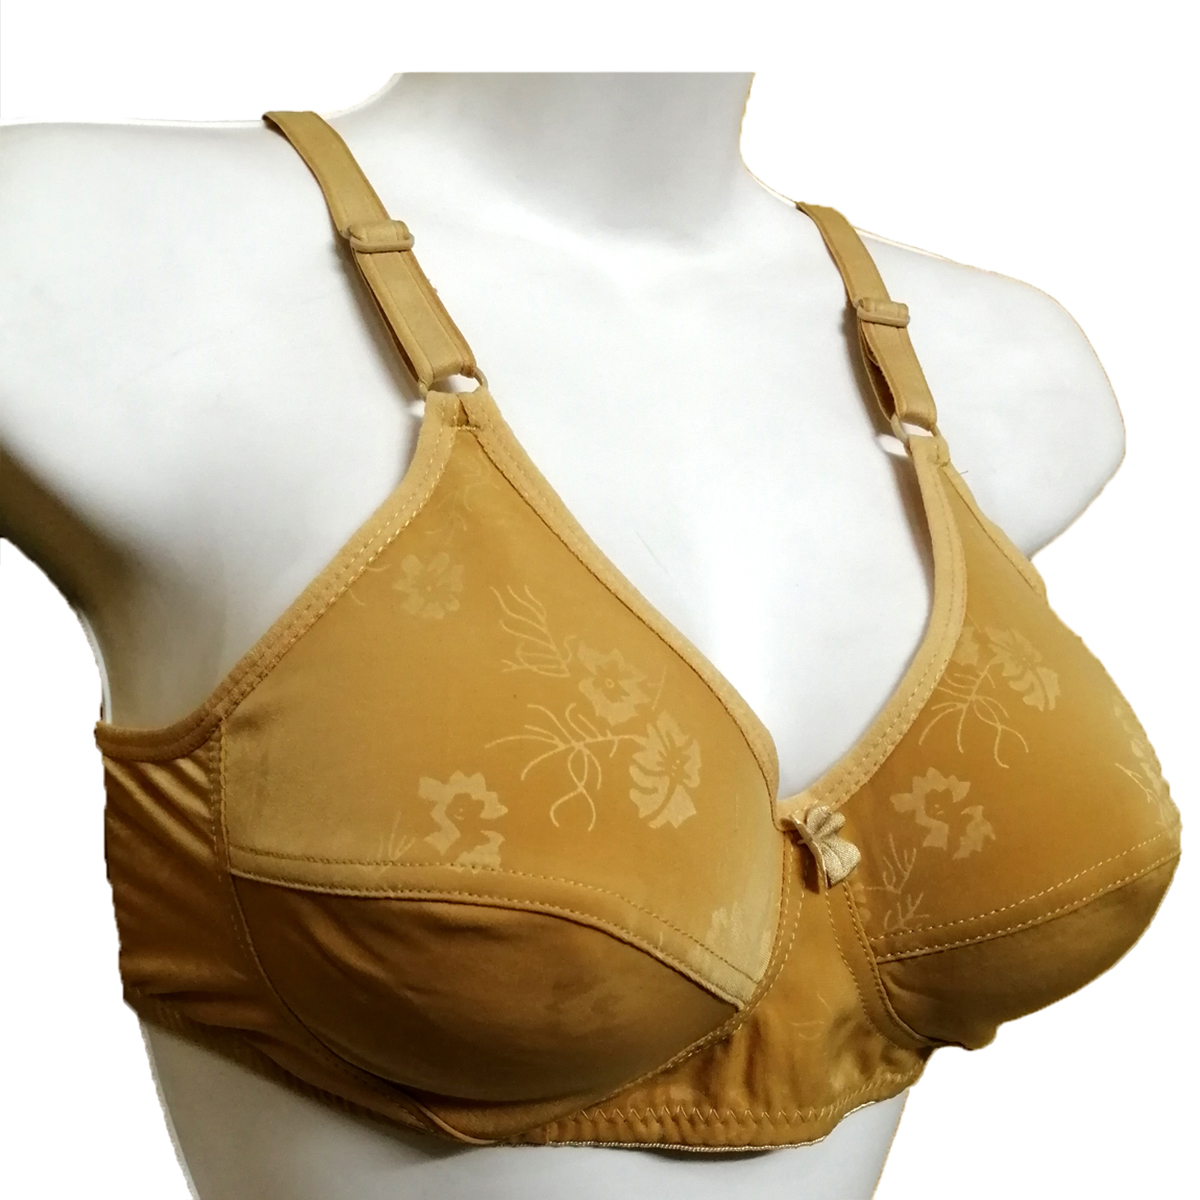 Plain Cotton Maroon Women Non Padded Bra at Rs 100/piece in